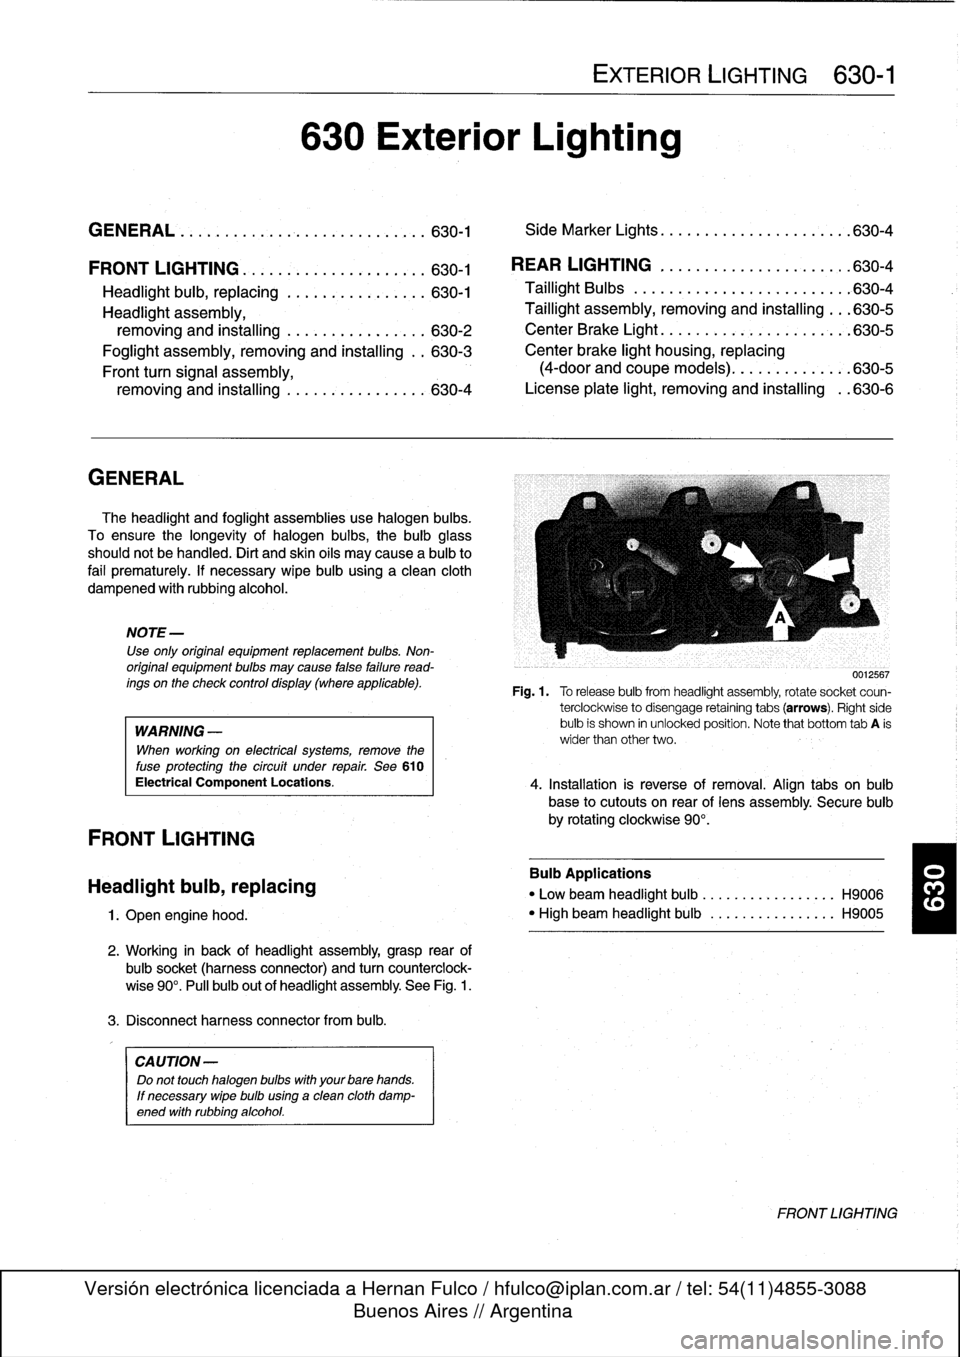 BMW M3 1993 E36 Workshop Manual 
FRONT
LIGHTING
.
...........
.
....
.
.
.
.
630-1

Headlight
buib,
replacing
............
.
.
.
.
630-1
Headlight
assembly,

removing
and
installing
.......
.
....
.
.
.
.
630-2

Foglight
assembly,
r